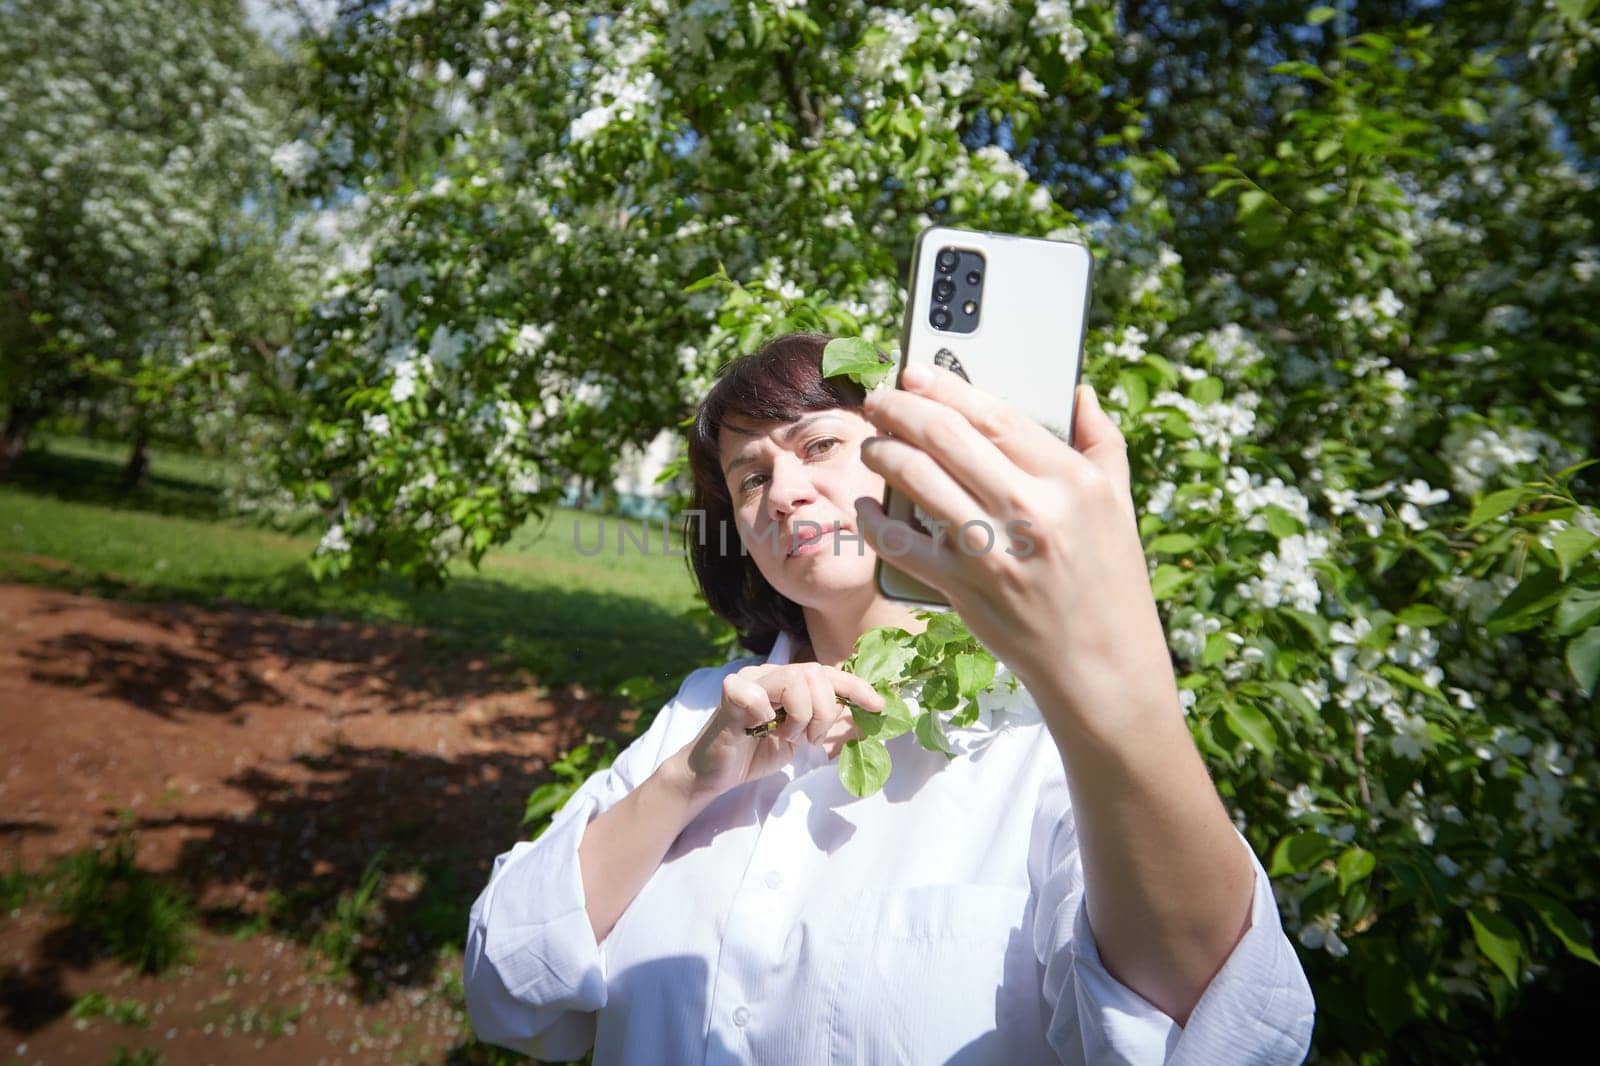 Brunette girl Using Smartphone in Blossoming Orchard at Springtime. Middle aged Woman taking selfie by phone among spring blossoms of apple trees